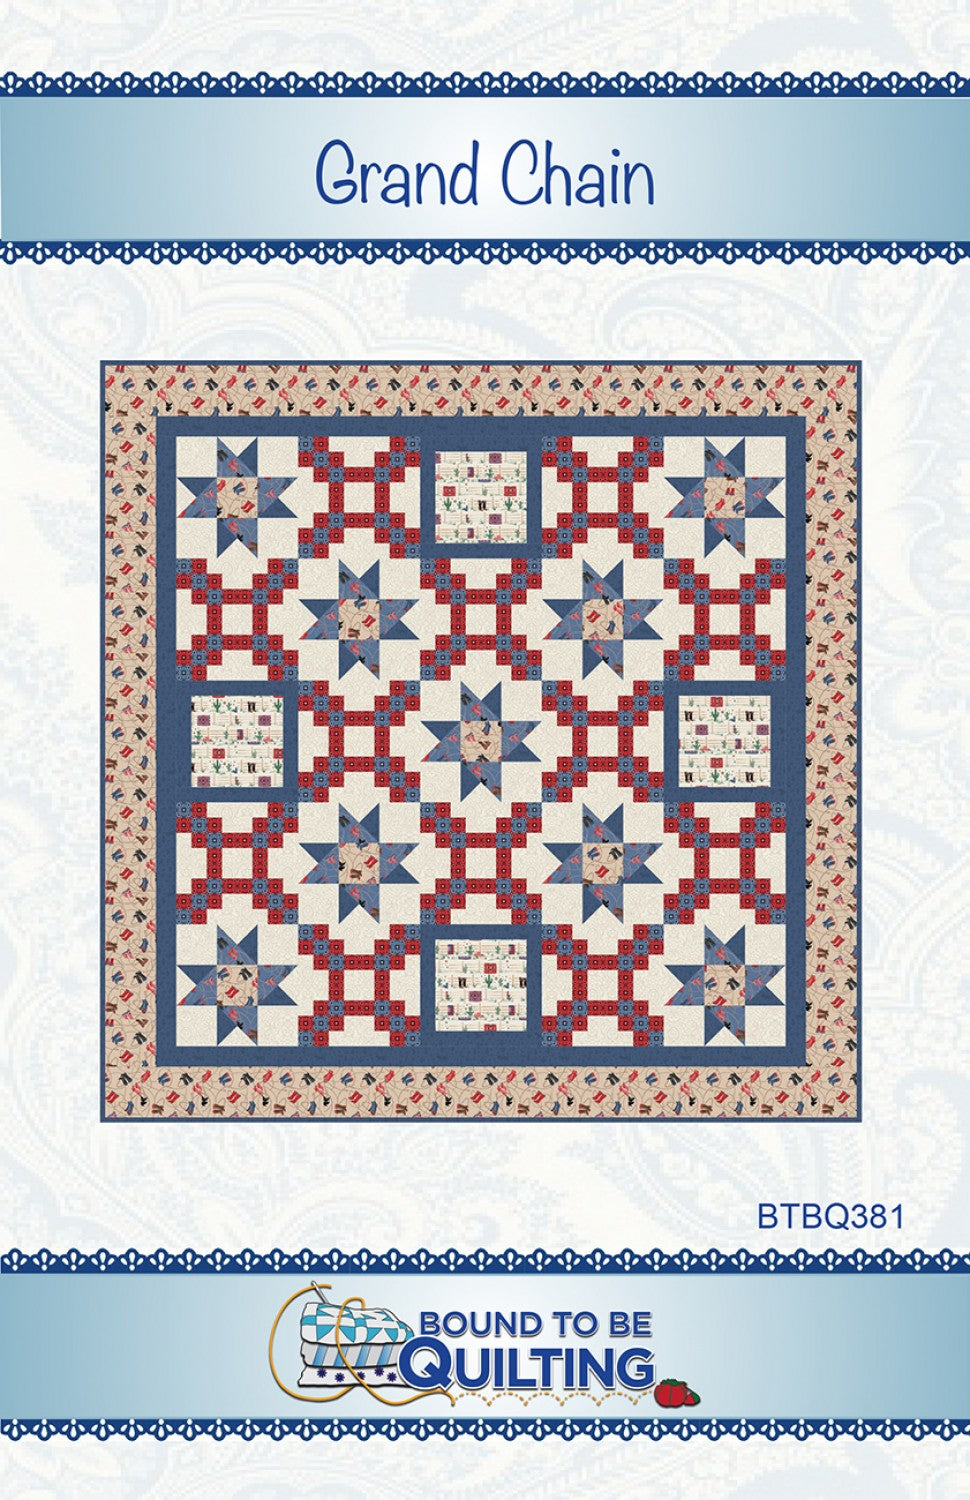 Grand Chain Quilt Pattern by Bound To Be Quilting, LLC